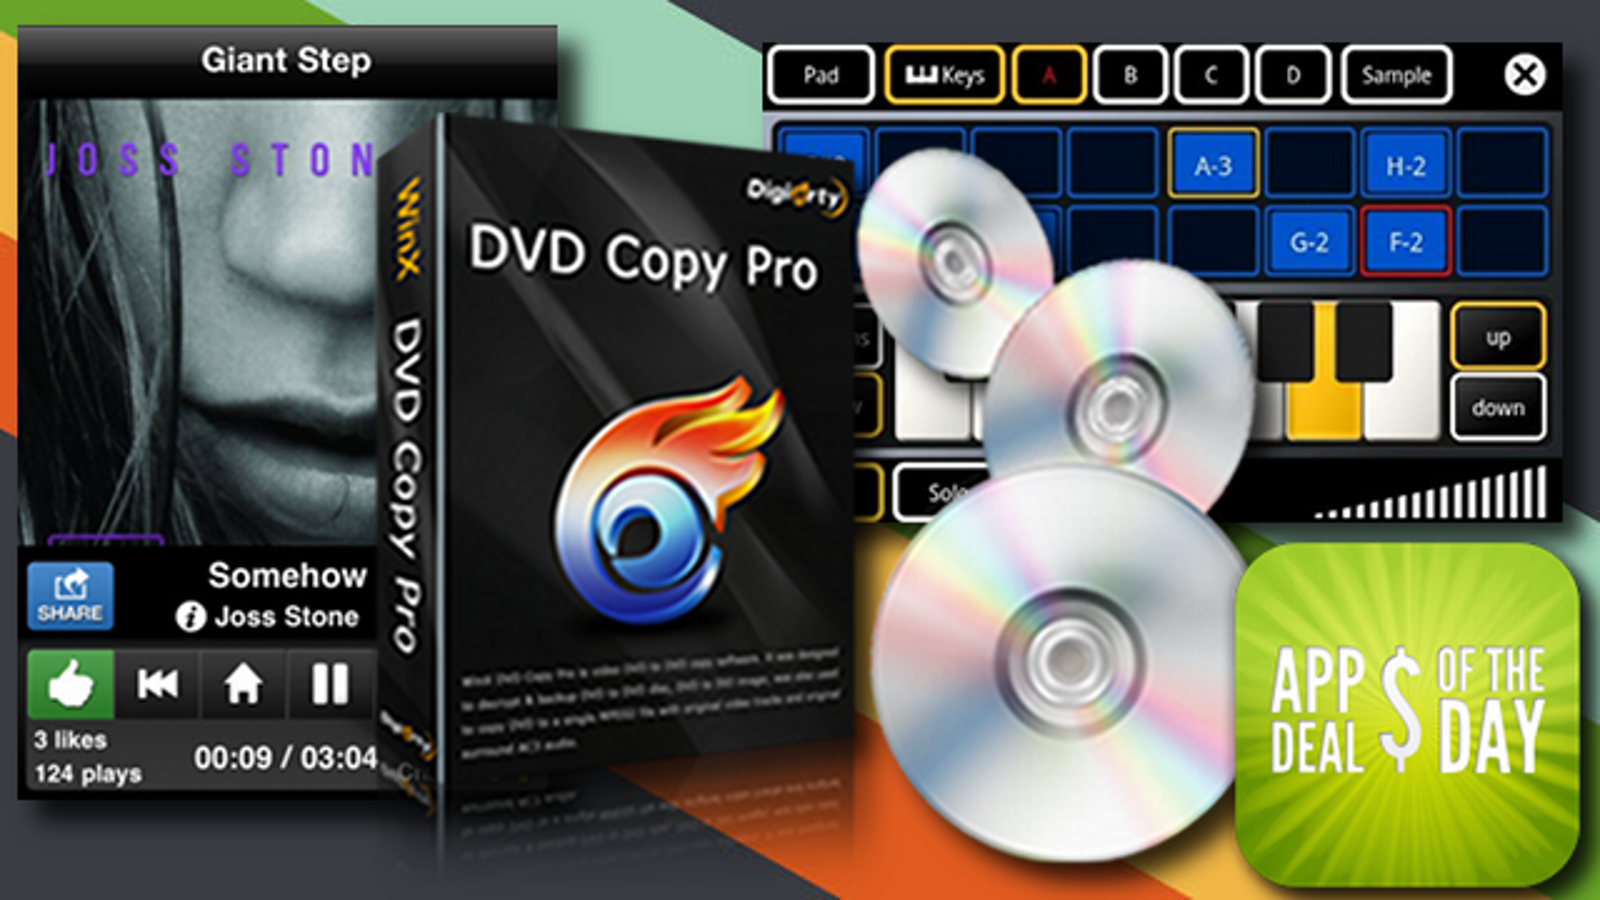 instal the new version for ipod WinX DVD Copy Pro 3.9.8